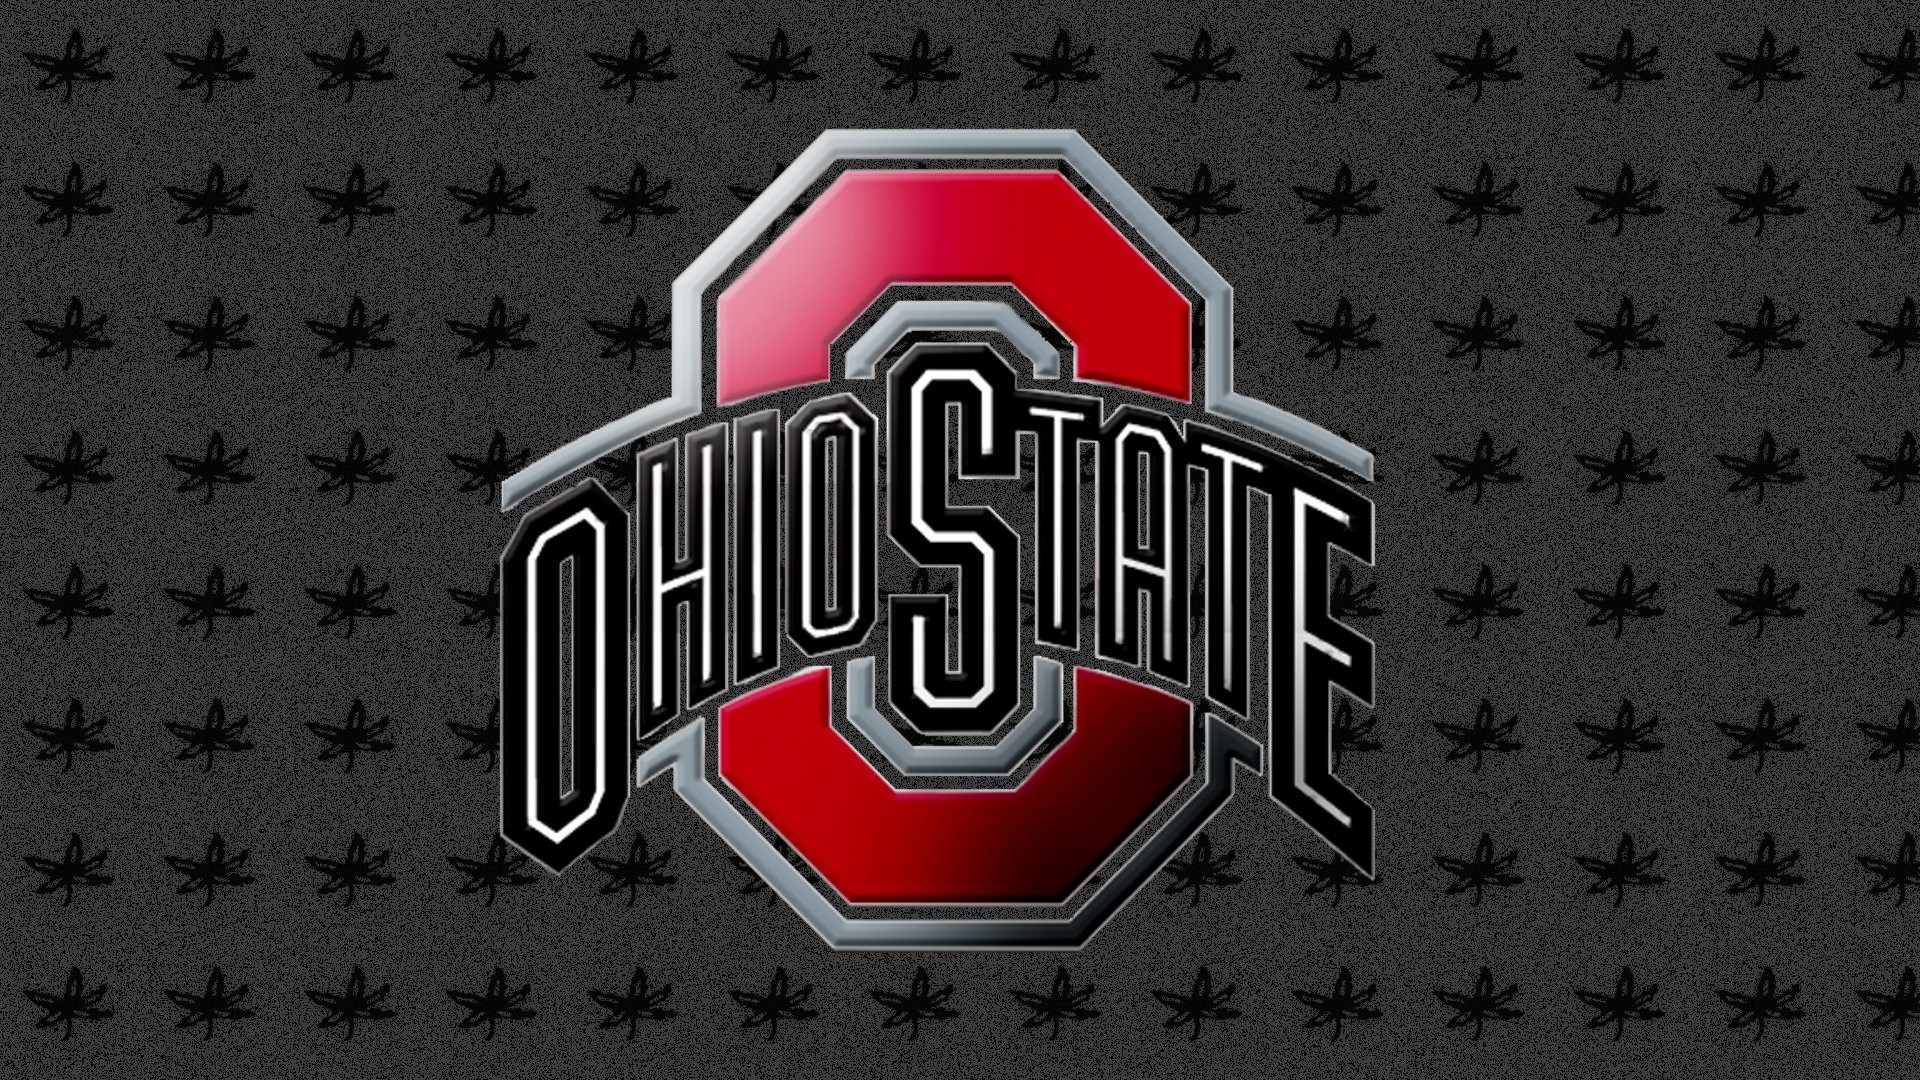 1920x1080 Ohio State Football images OSU Desktop Wallpaper 55 HD wallpaper and .